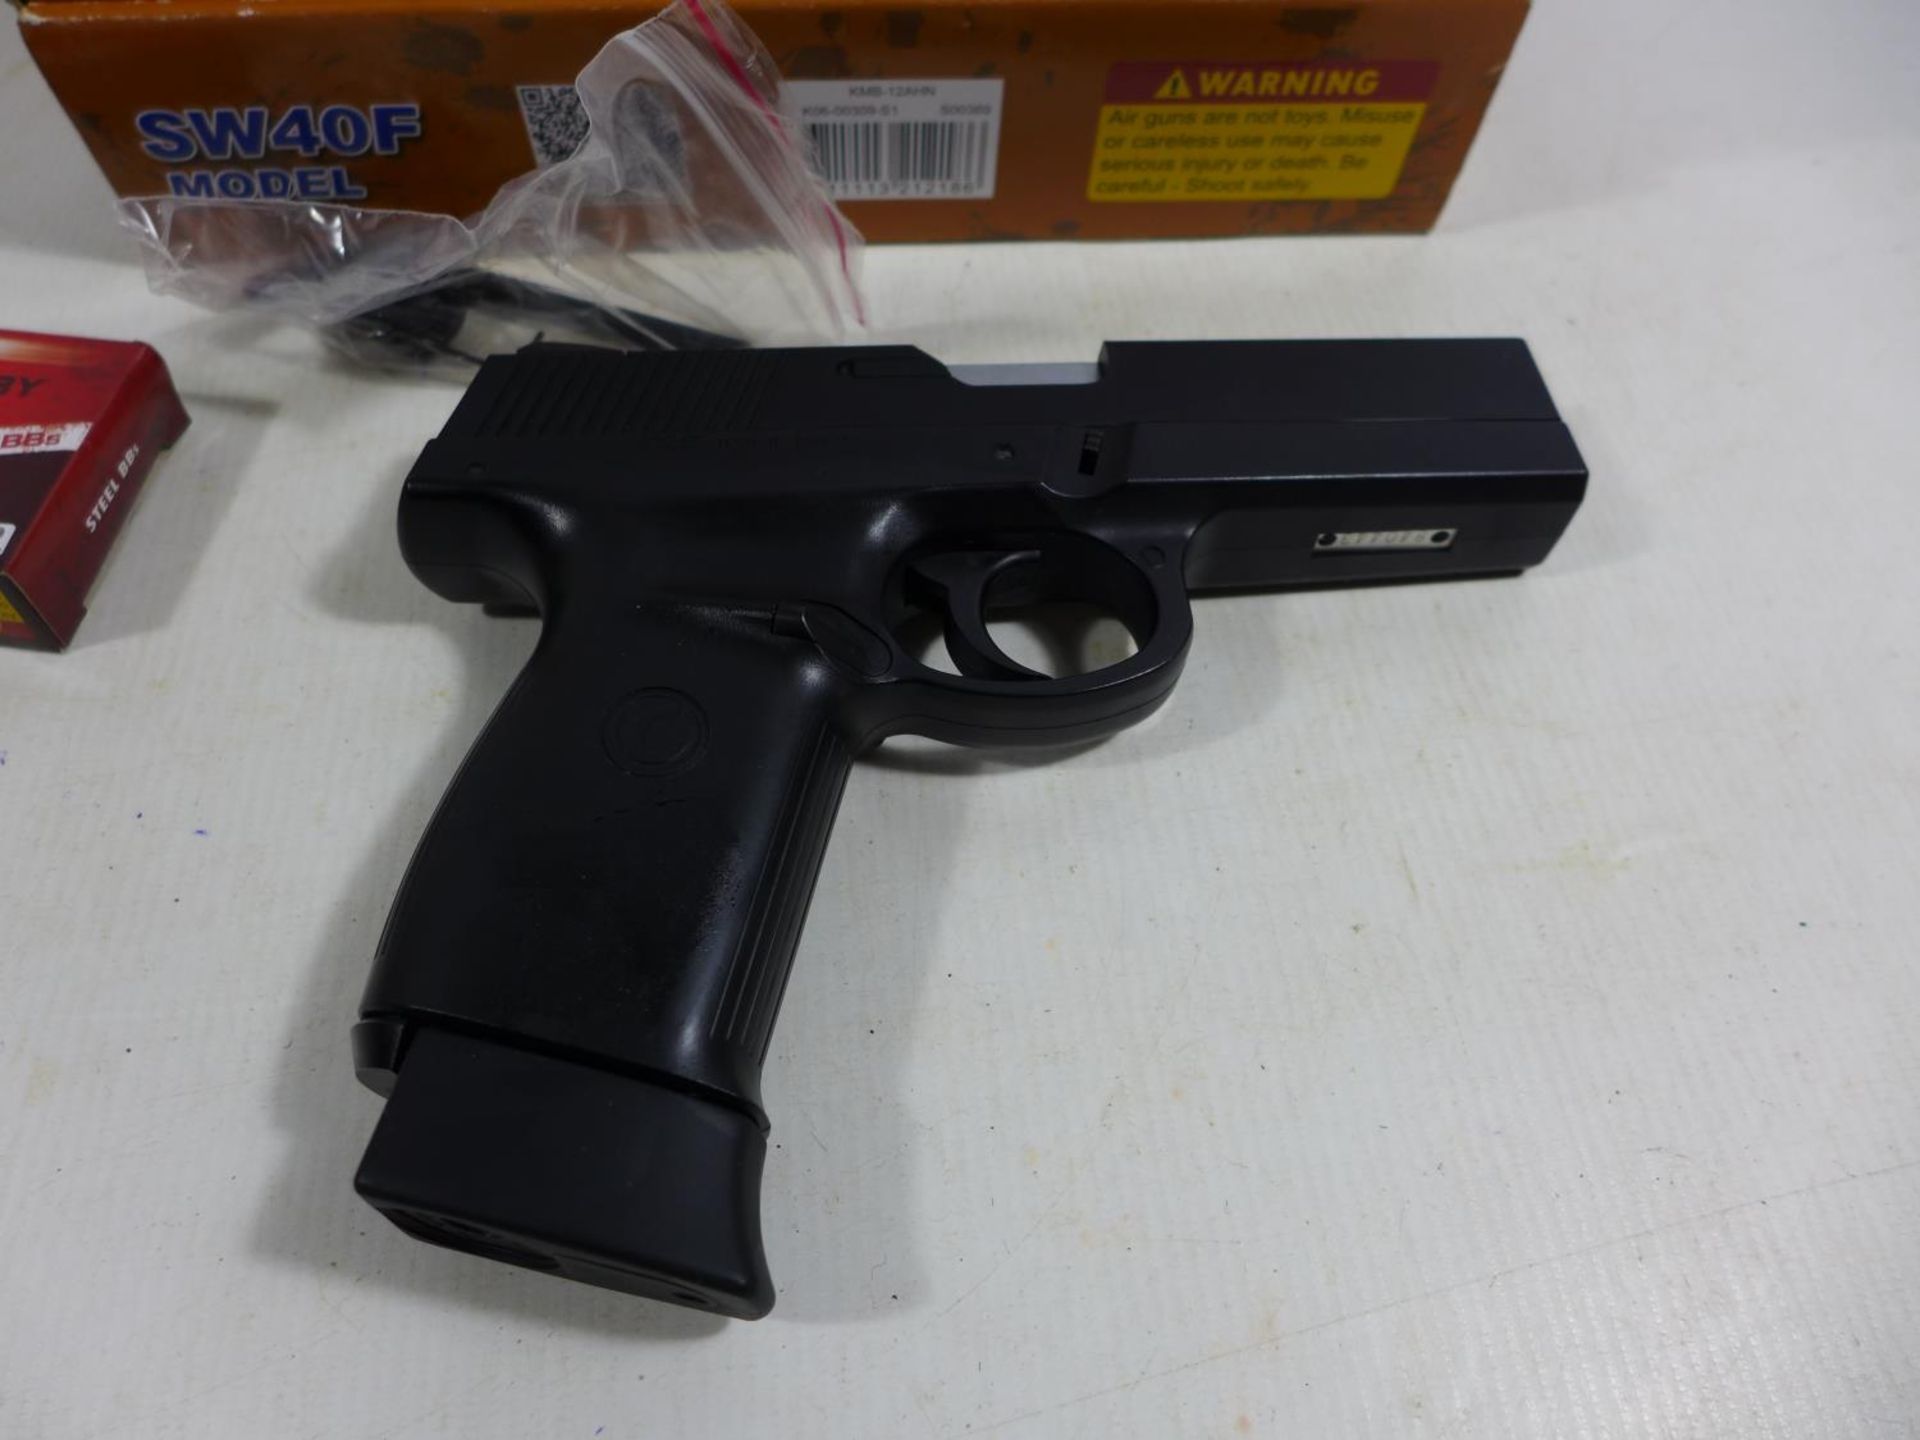 A BOXED AS NEW SW40F MODEL CO2 .177 CALIBRE AIR PISTOL, 11CM BARREL, LENGTH 19.5CM, COMPLETE WITH - Image 4 of 6